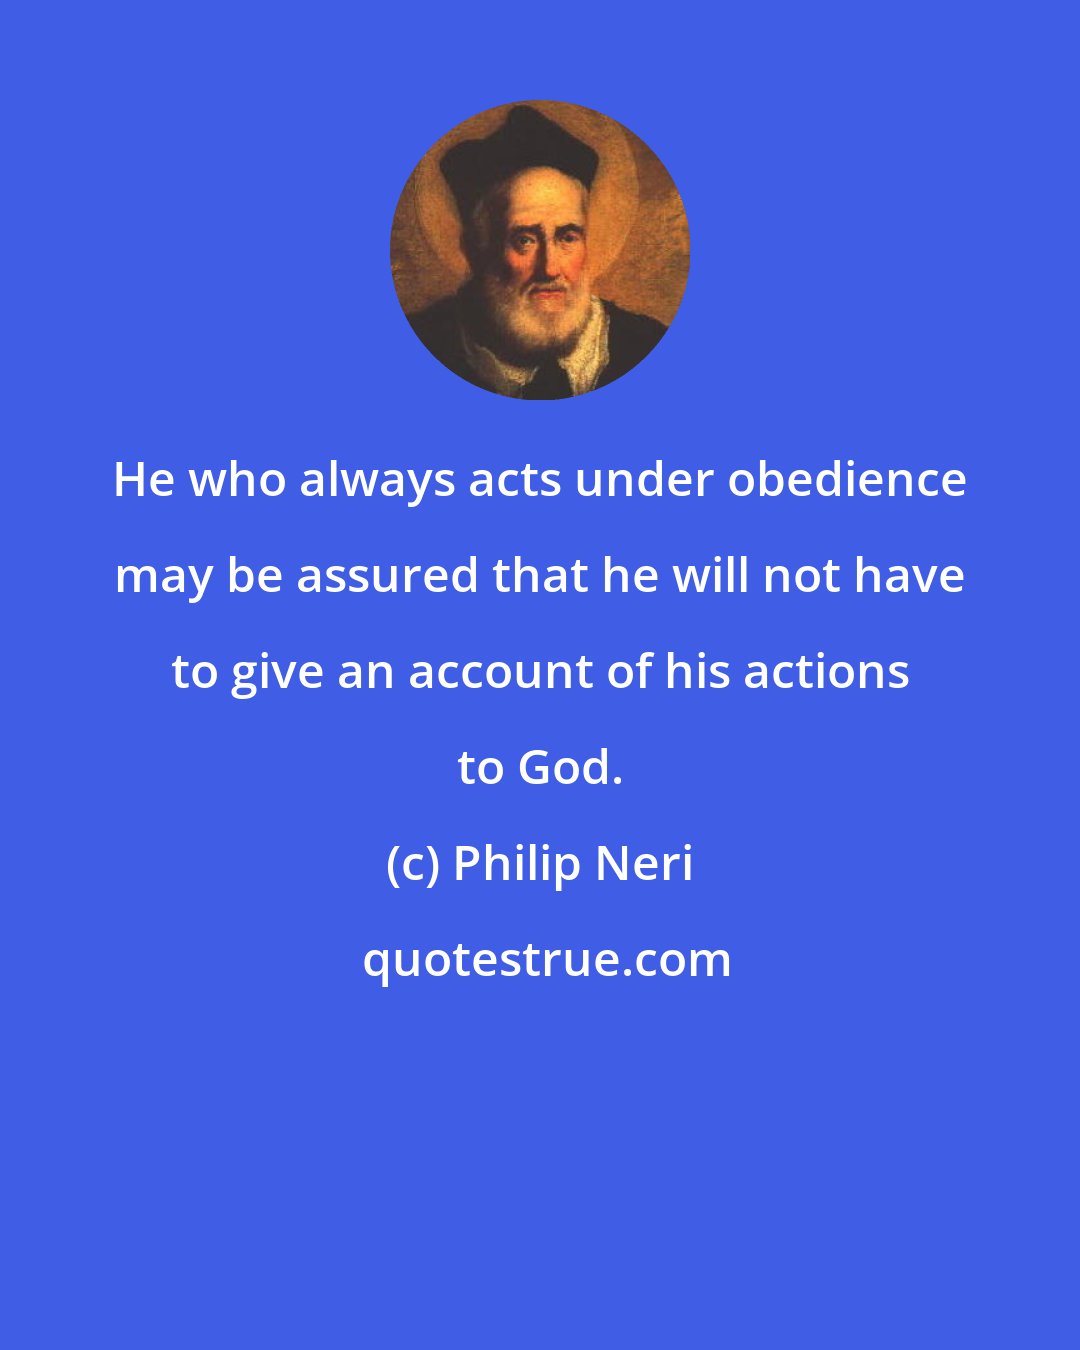 Philip Neri: He who always acts under obedience may be assured that he will not have to give an account of his actions to God.